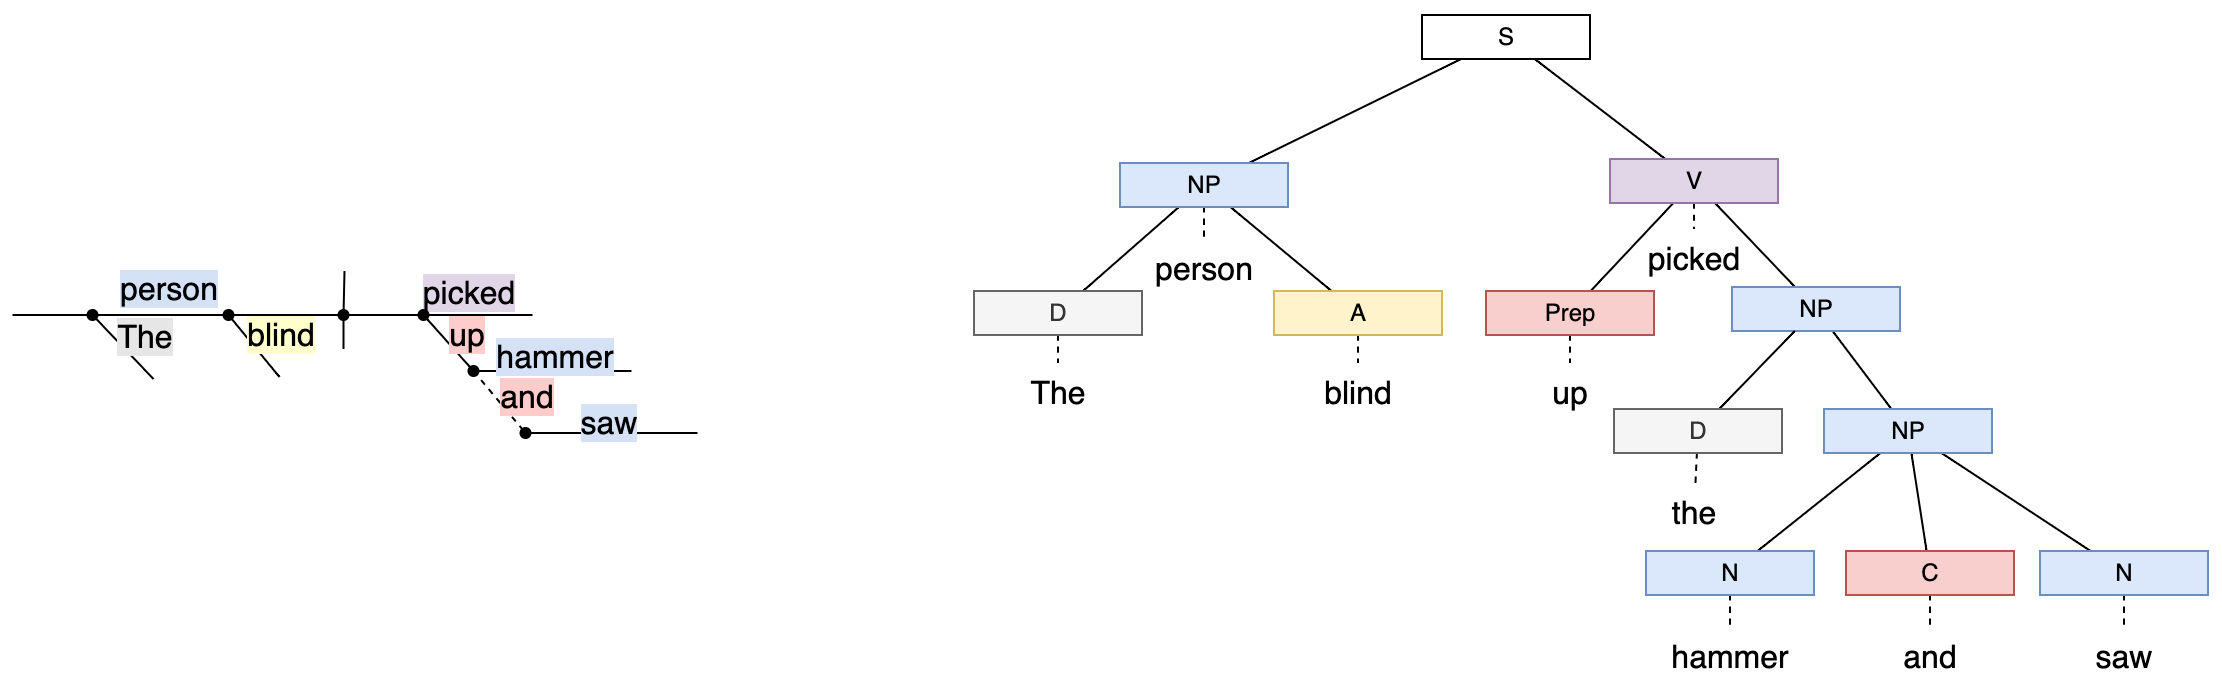 Sentence trees are constructed to explain grammatically complicated sentences